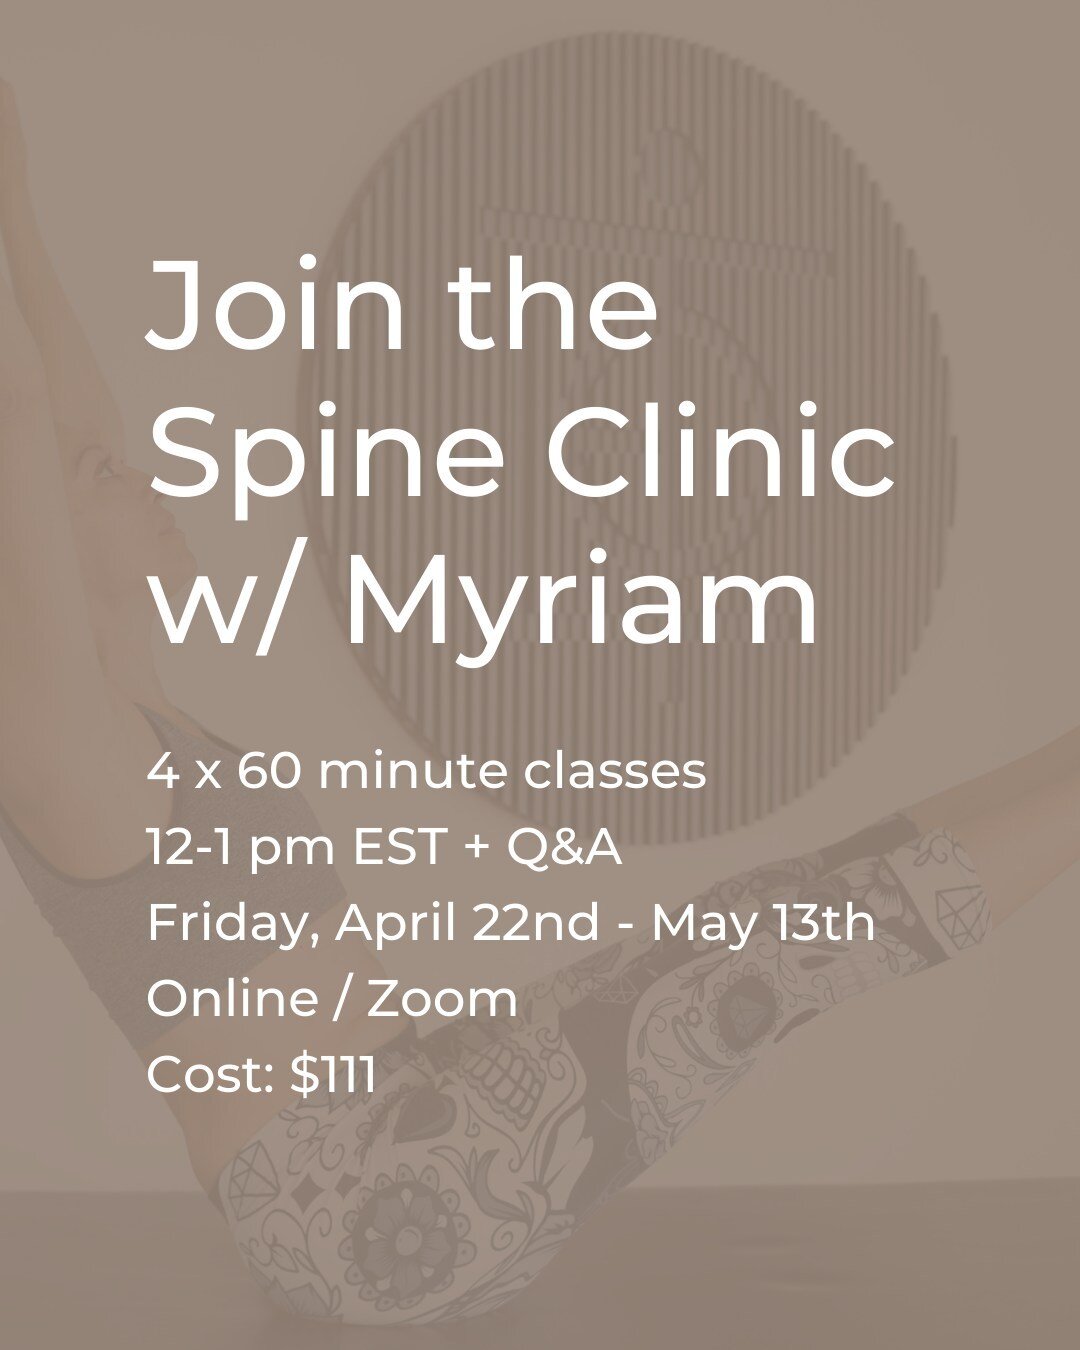 Move with ease and comfort through the stages of life! Join the next 4-week online clinic with Myriam. ⁠
⁠
You can attend classes live or watch the recorded sessions at your own convenience. Classes are 1 hr with an extra 15 minutes for asking questi